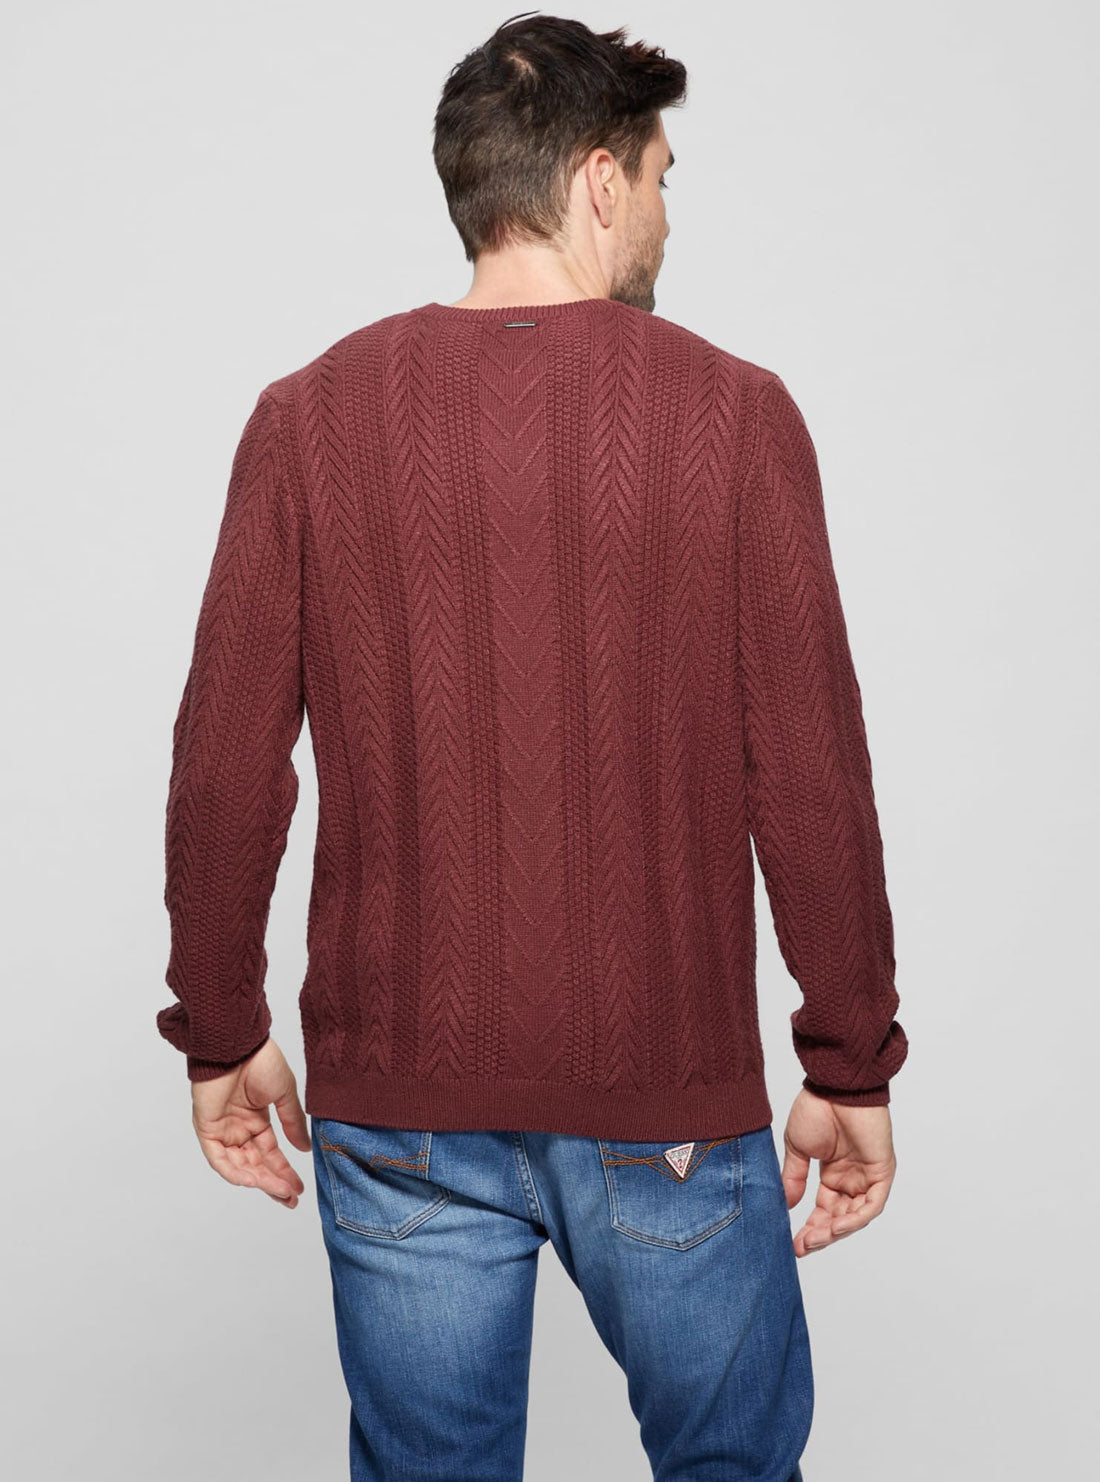 Maroon Red Cable Ethan Knit Top | GUESS men's apparel | back view